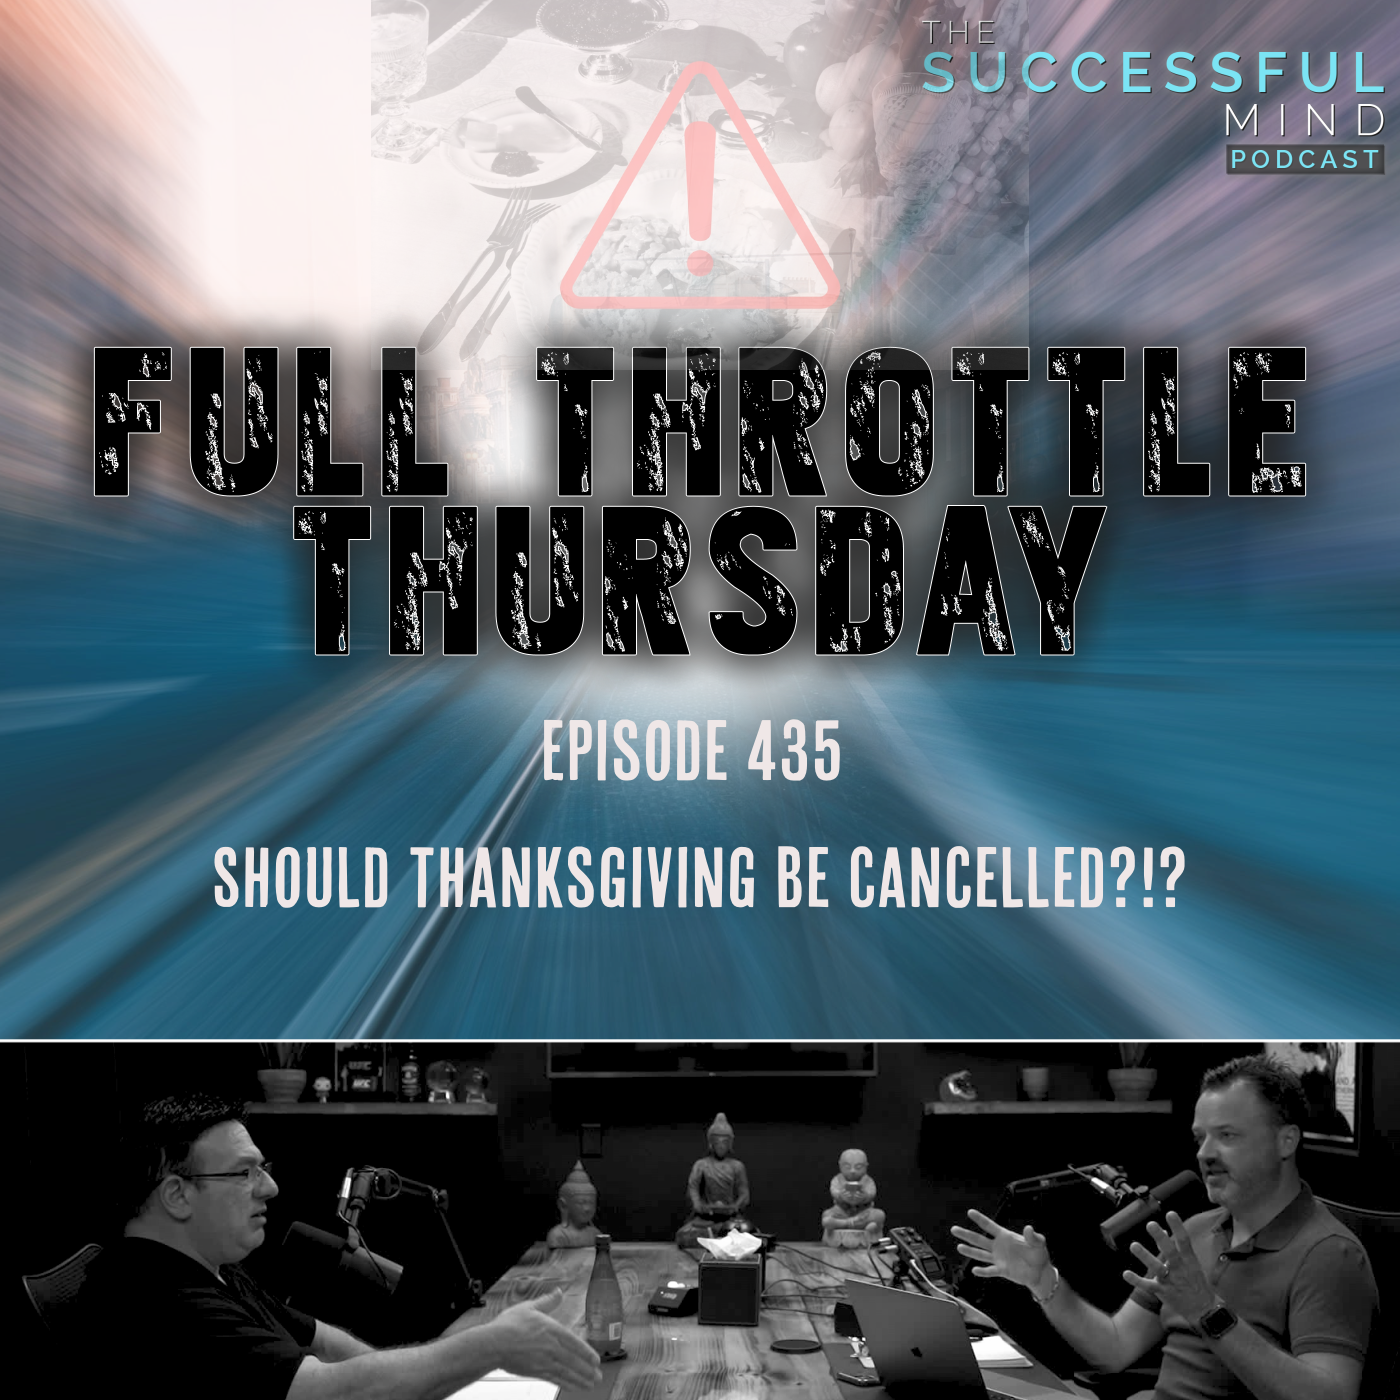 The Successful Mind Podcast - Full Throttle Thursday - Should Thanksgiving Be Cancelled?!?